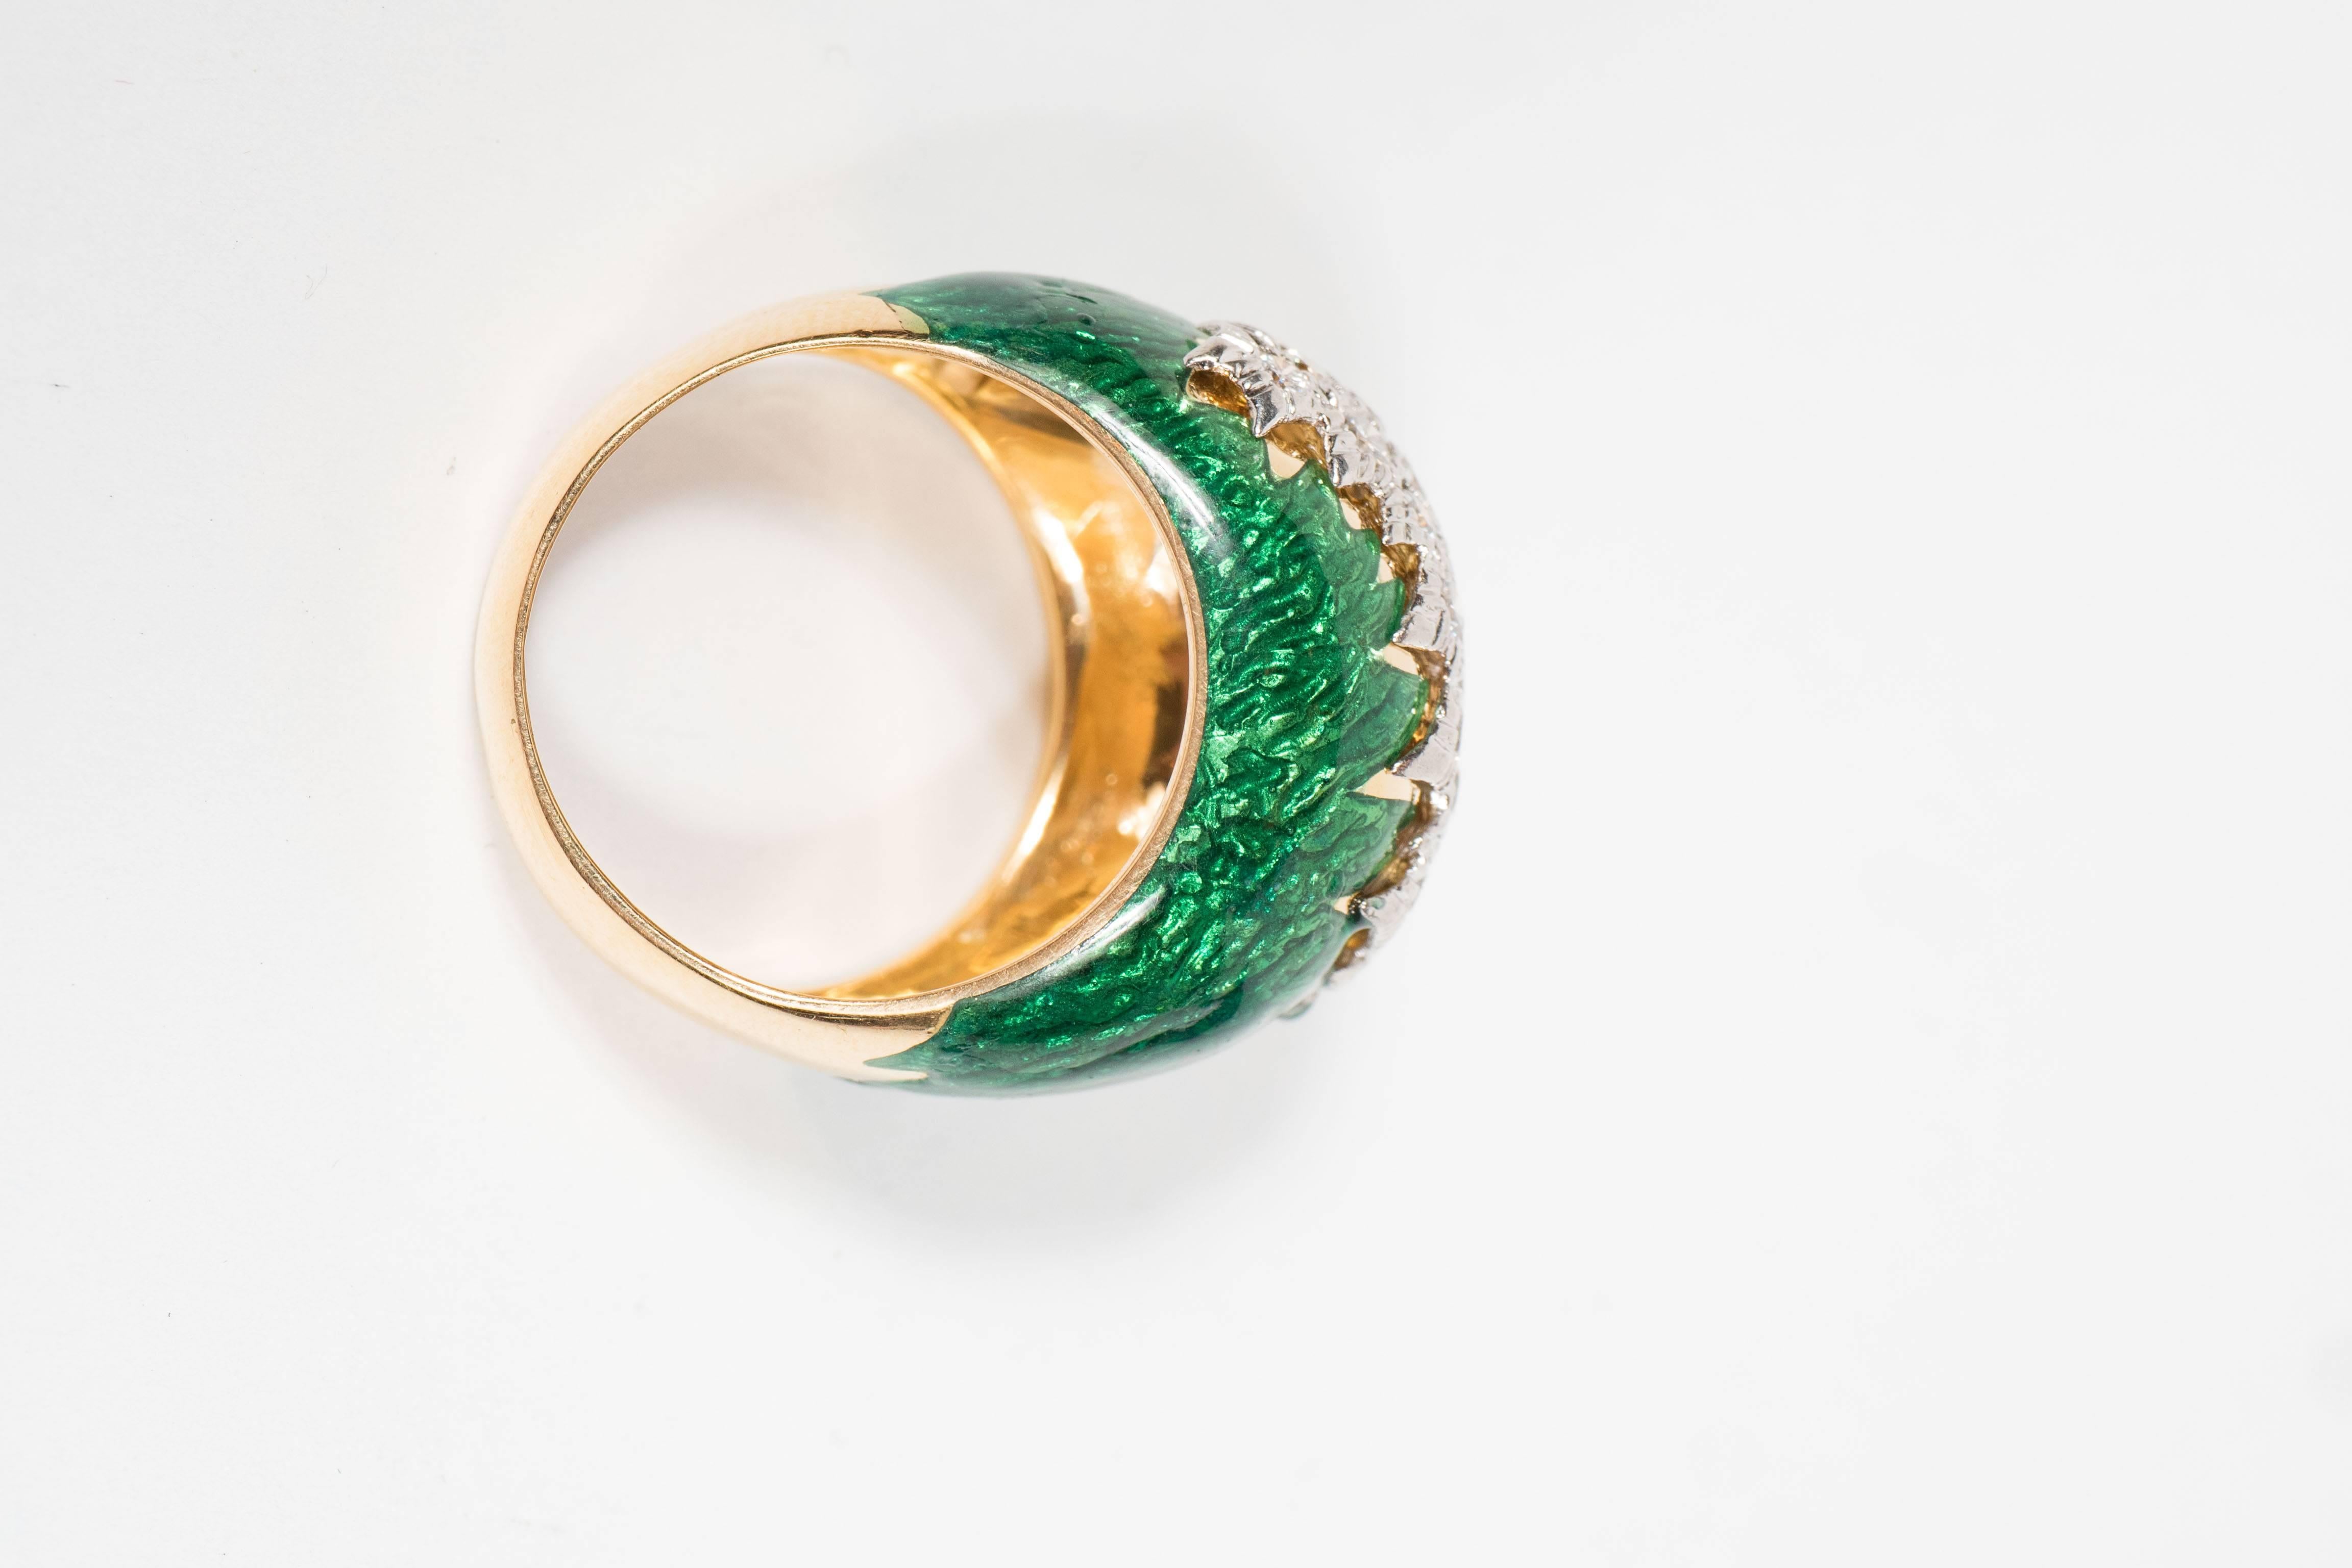 Mid-Century Modernist 18-karat gold, platinum, diamond, and green enamel band of bombe form is set with 1.30 carats of round cut diamonds weighing 16 grams inclusive, signed Webb. It is currently a size 8. This was made in New York Circa 1968. It is